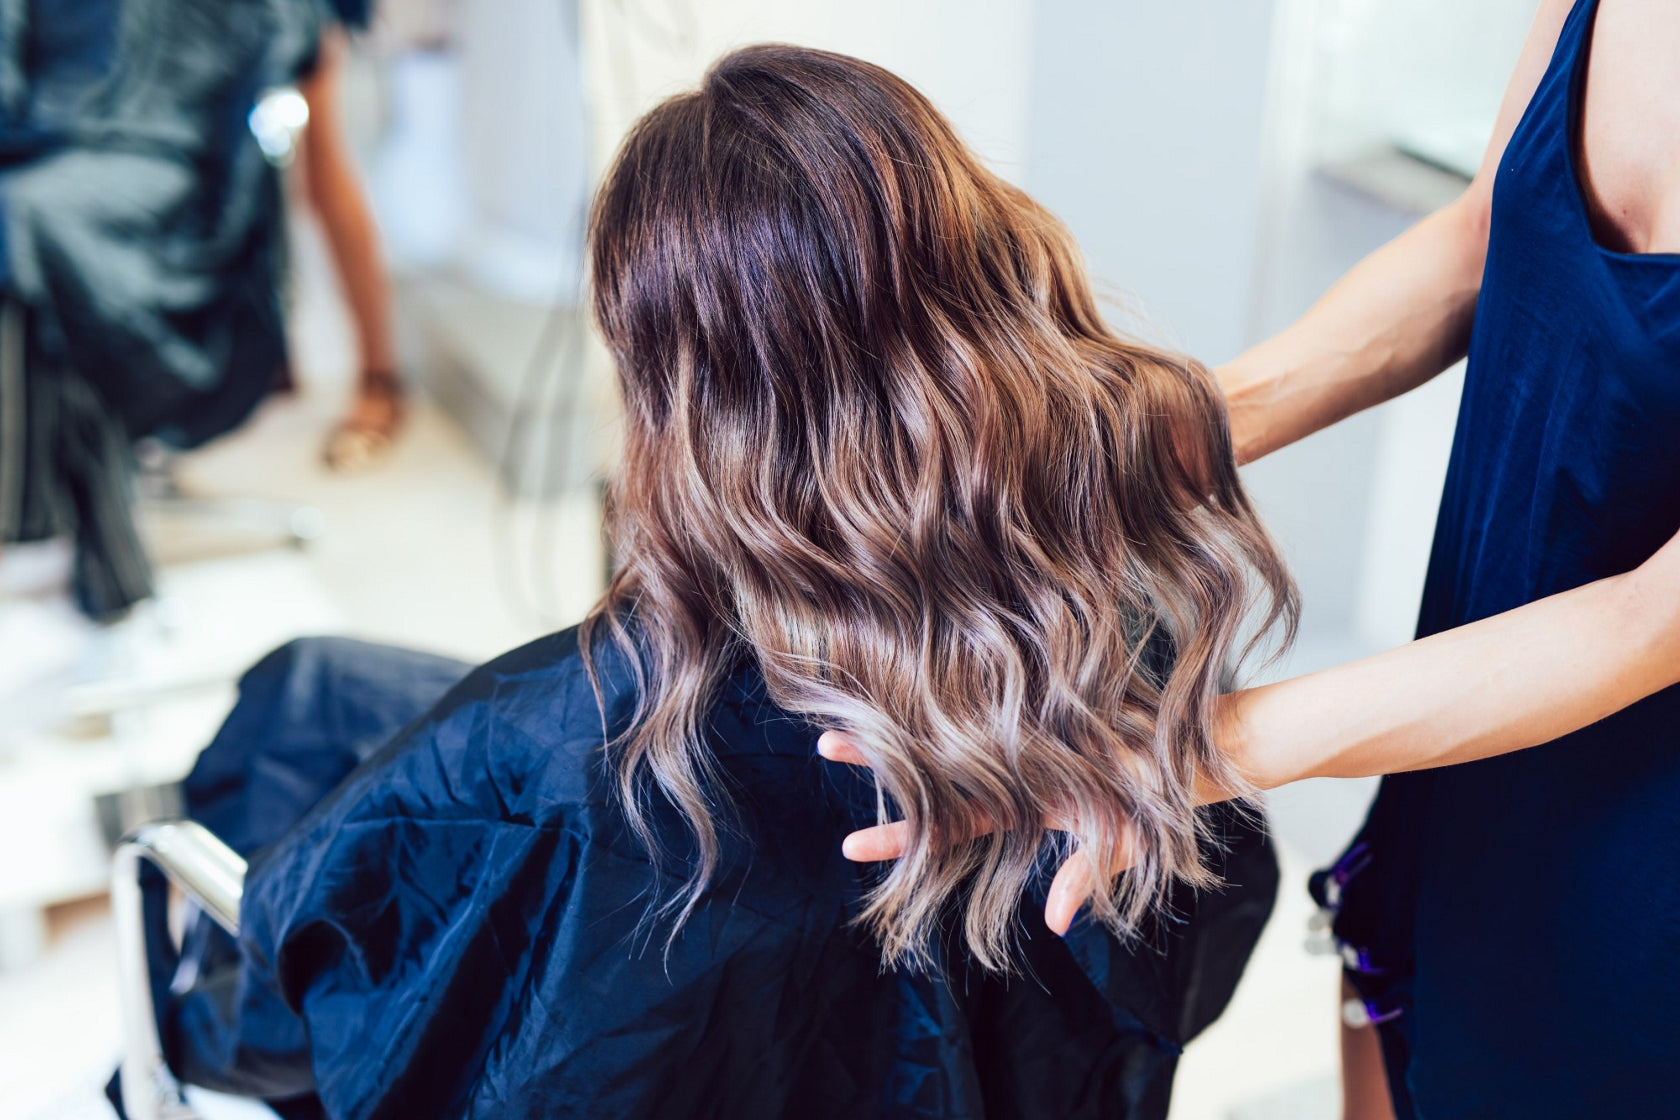 Here's what you need to know about coloring virgin hair for the first time